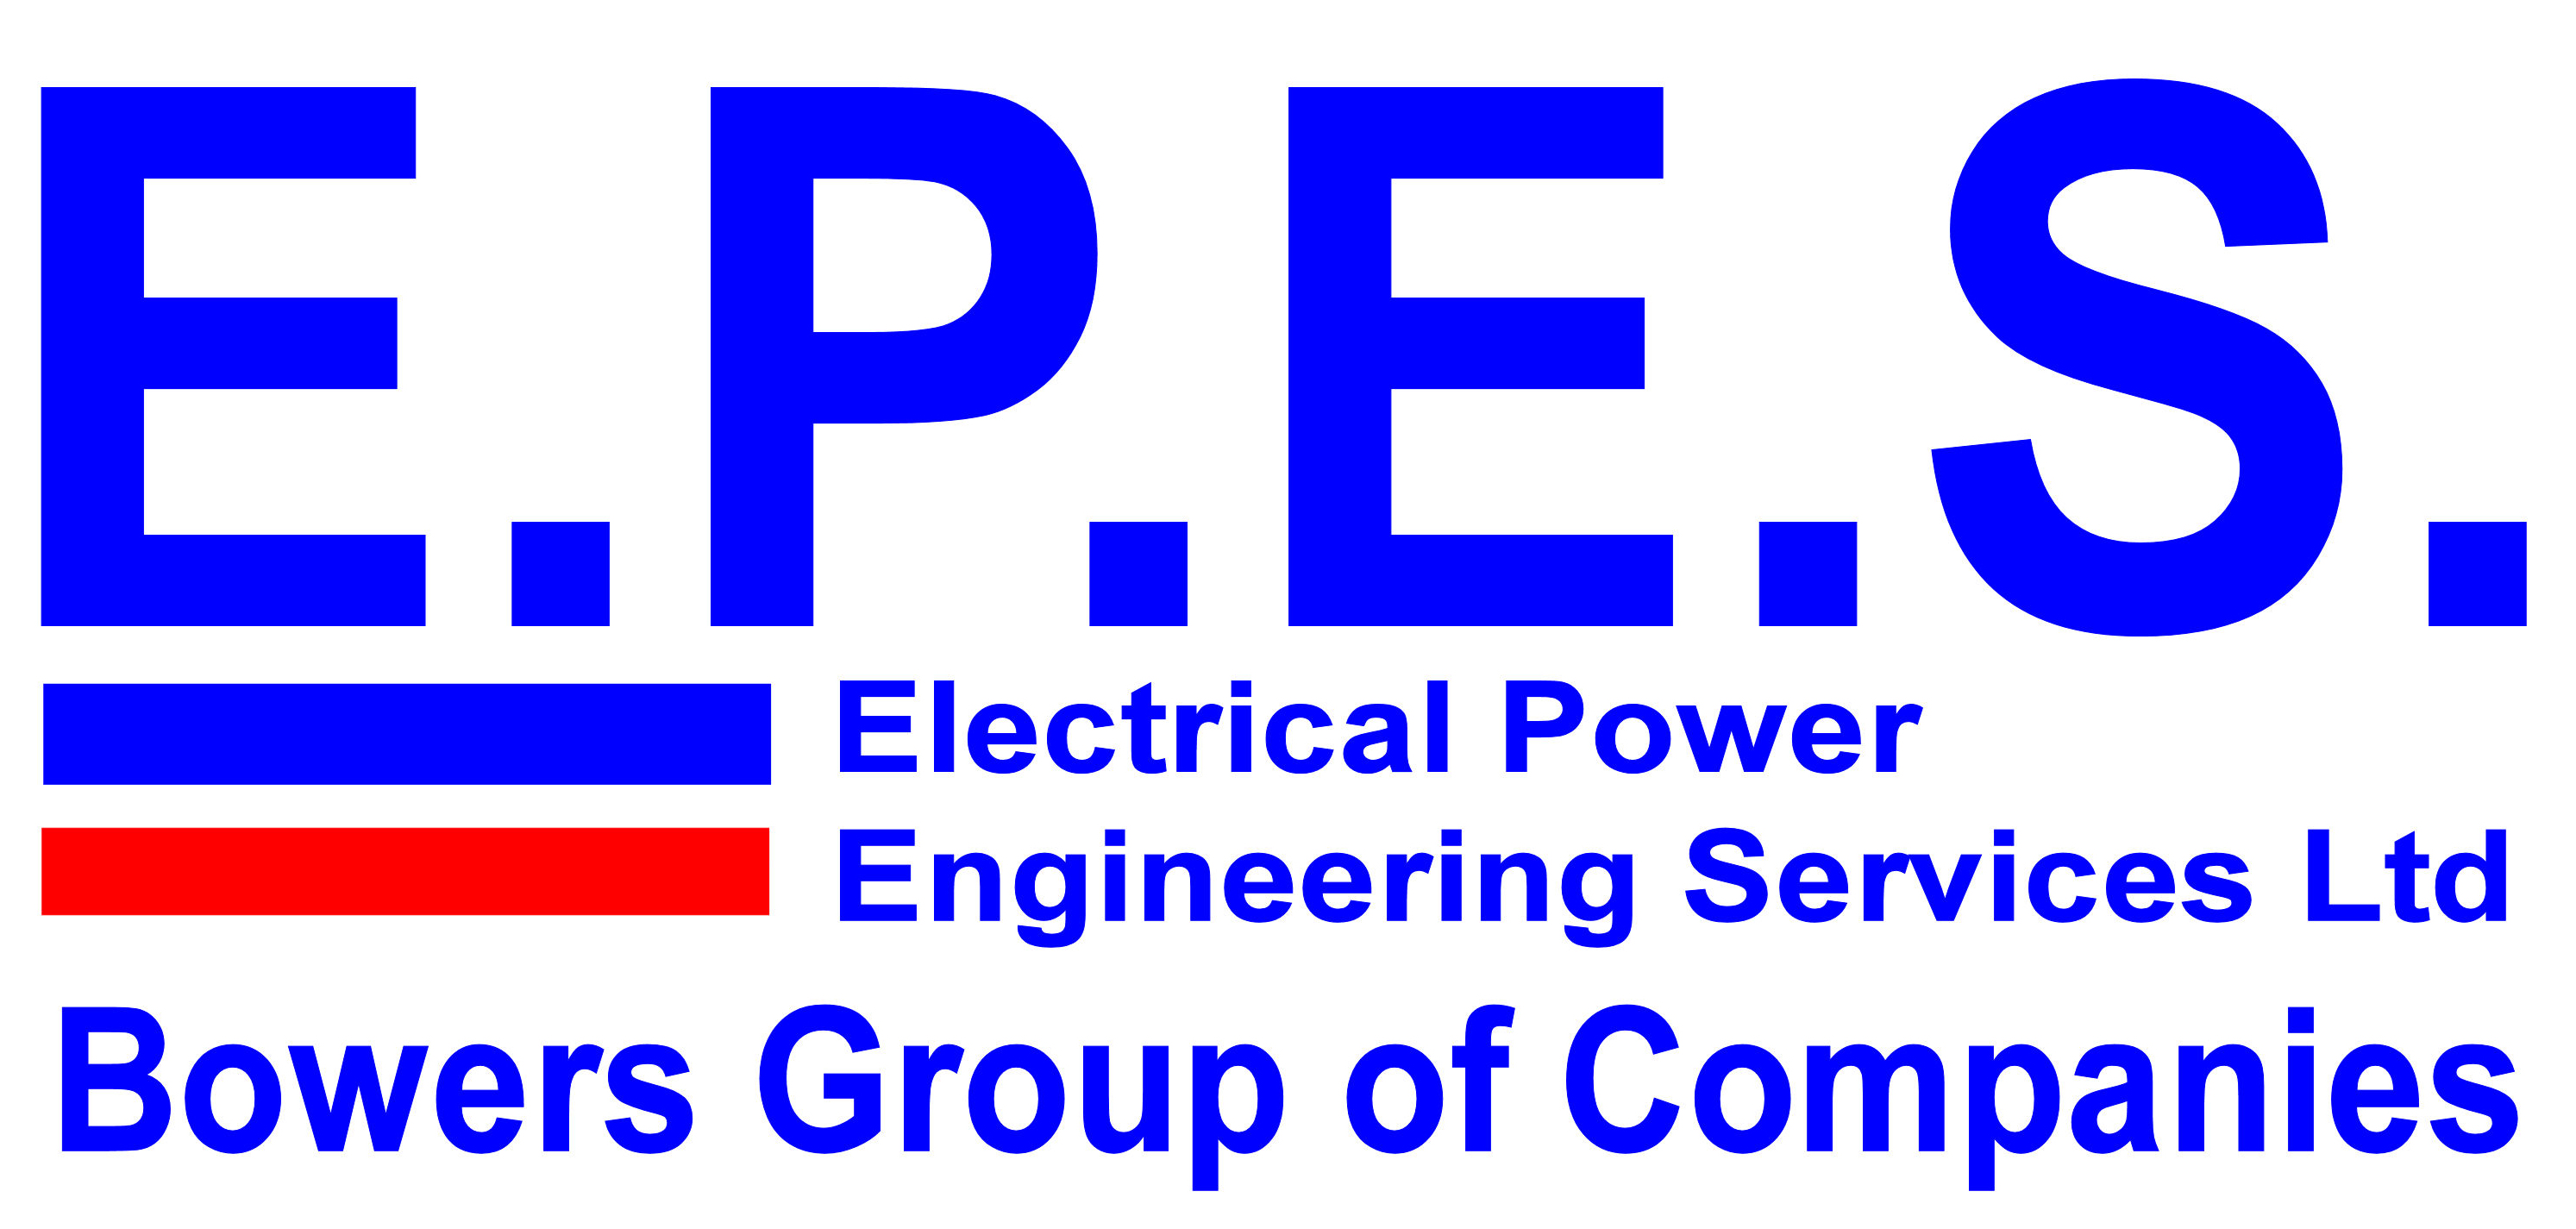 Bowers Electrical